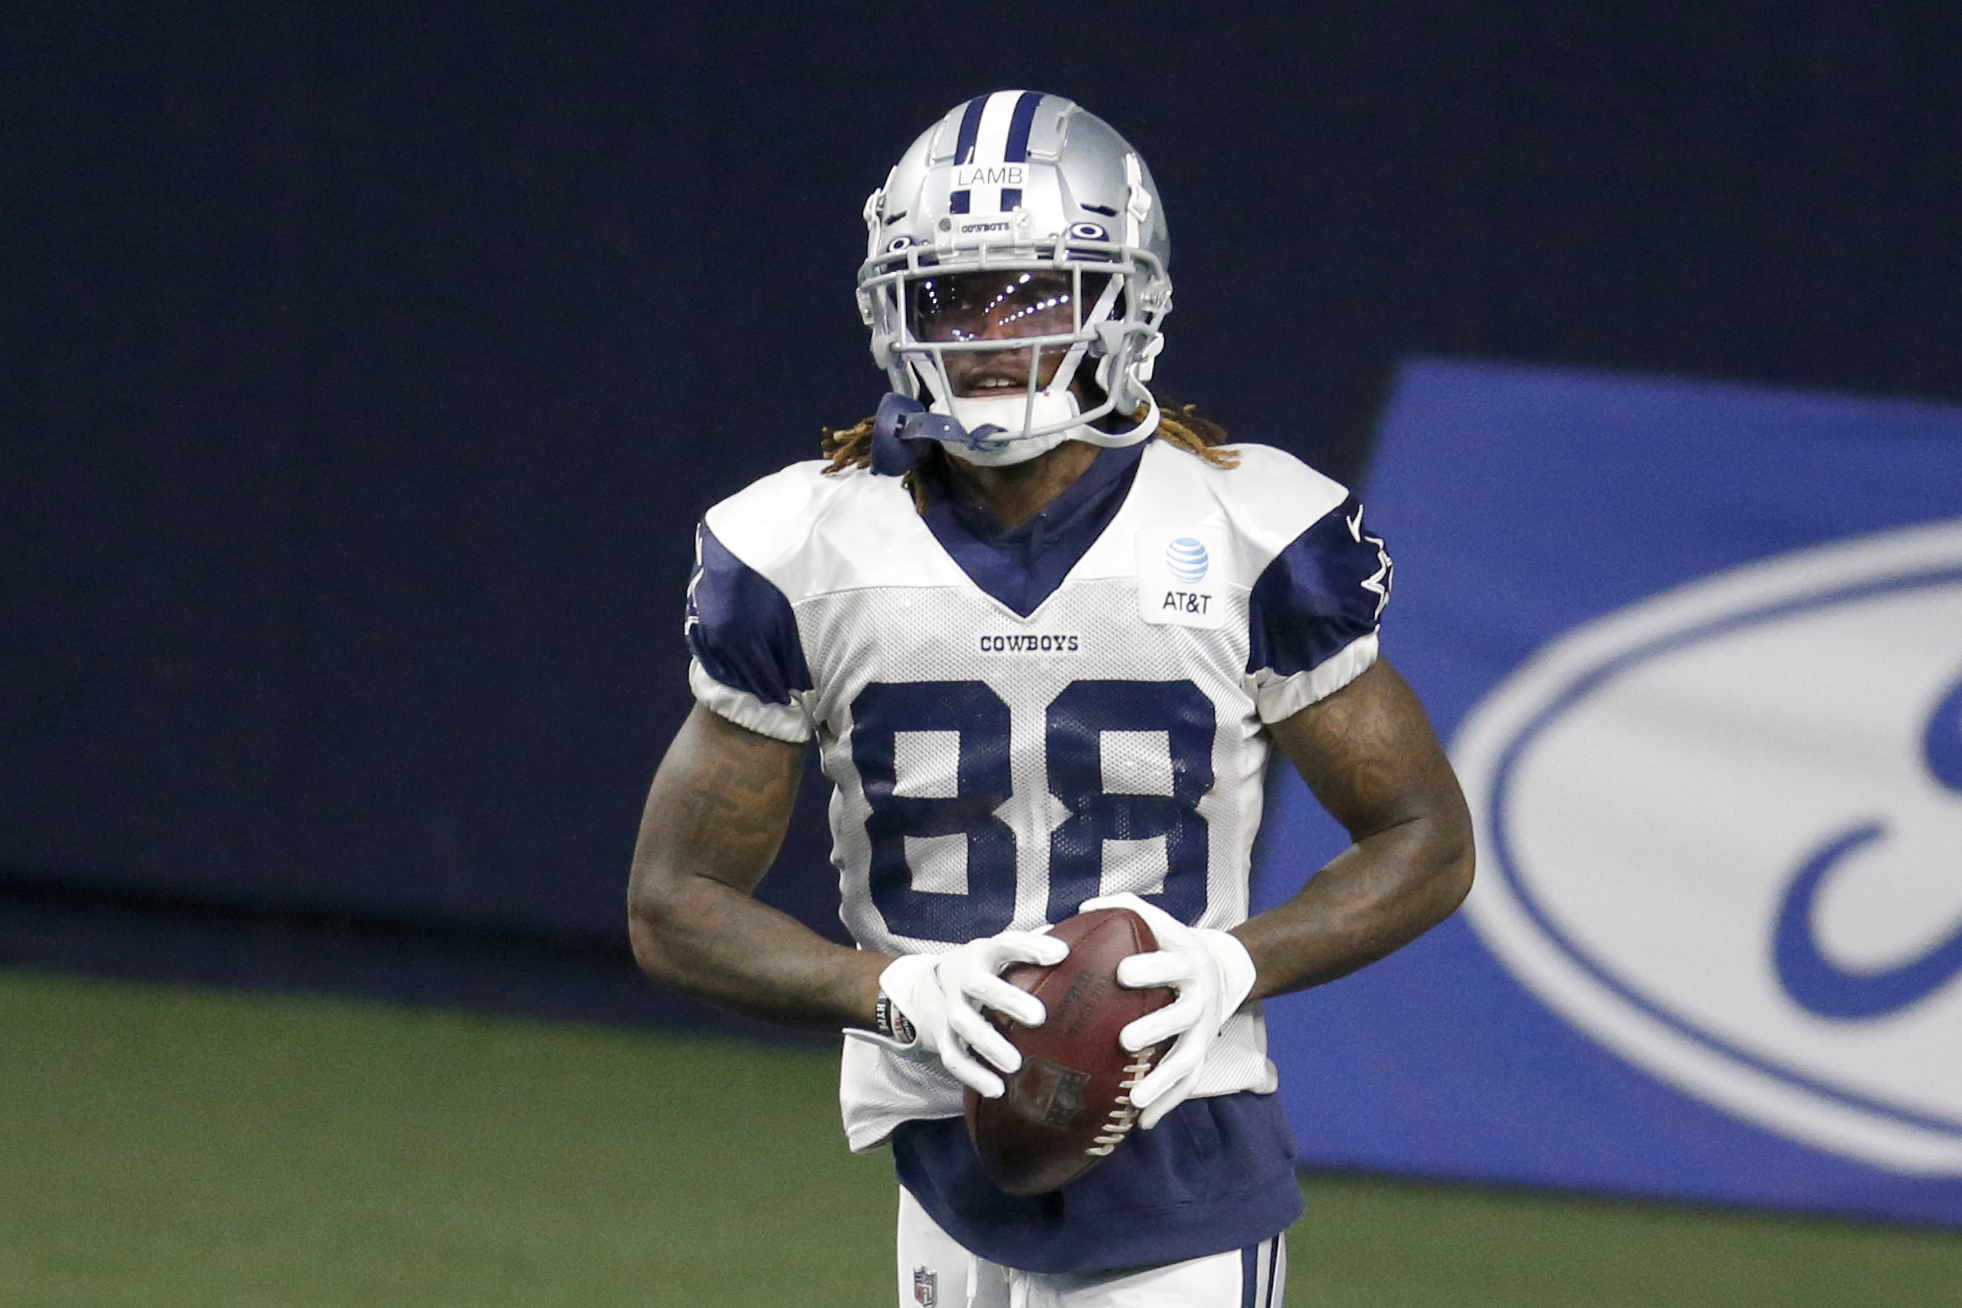 What impact will receiver CeeDee Lamb have on the Cowboys